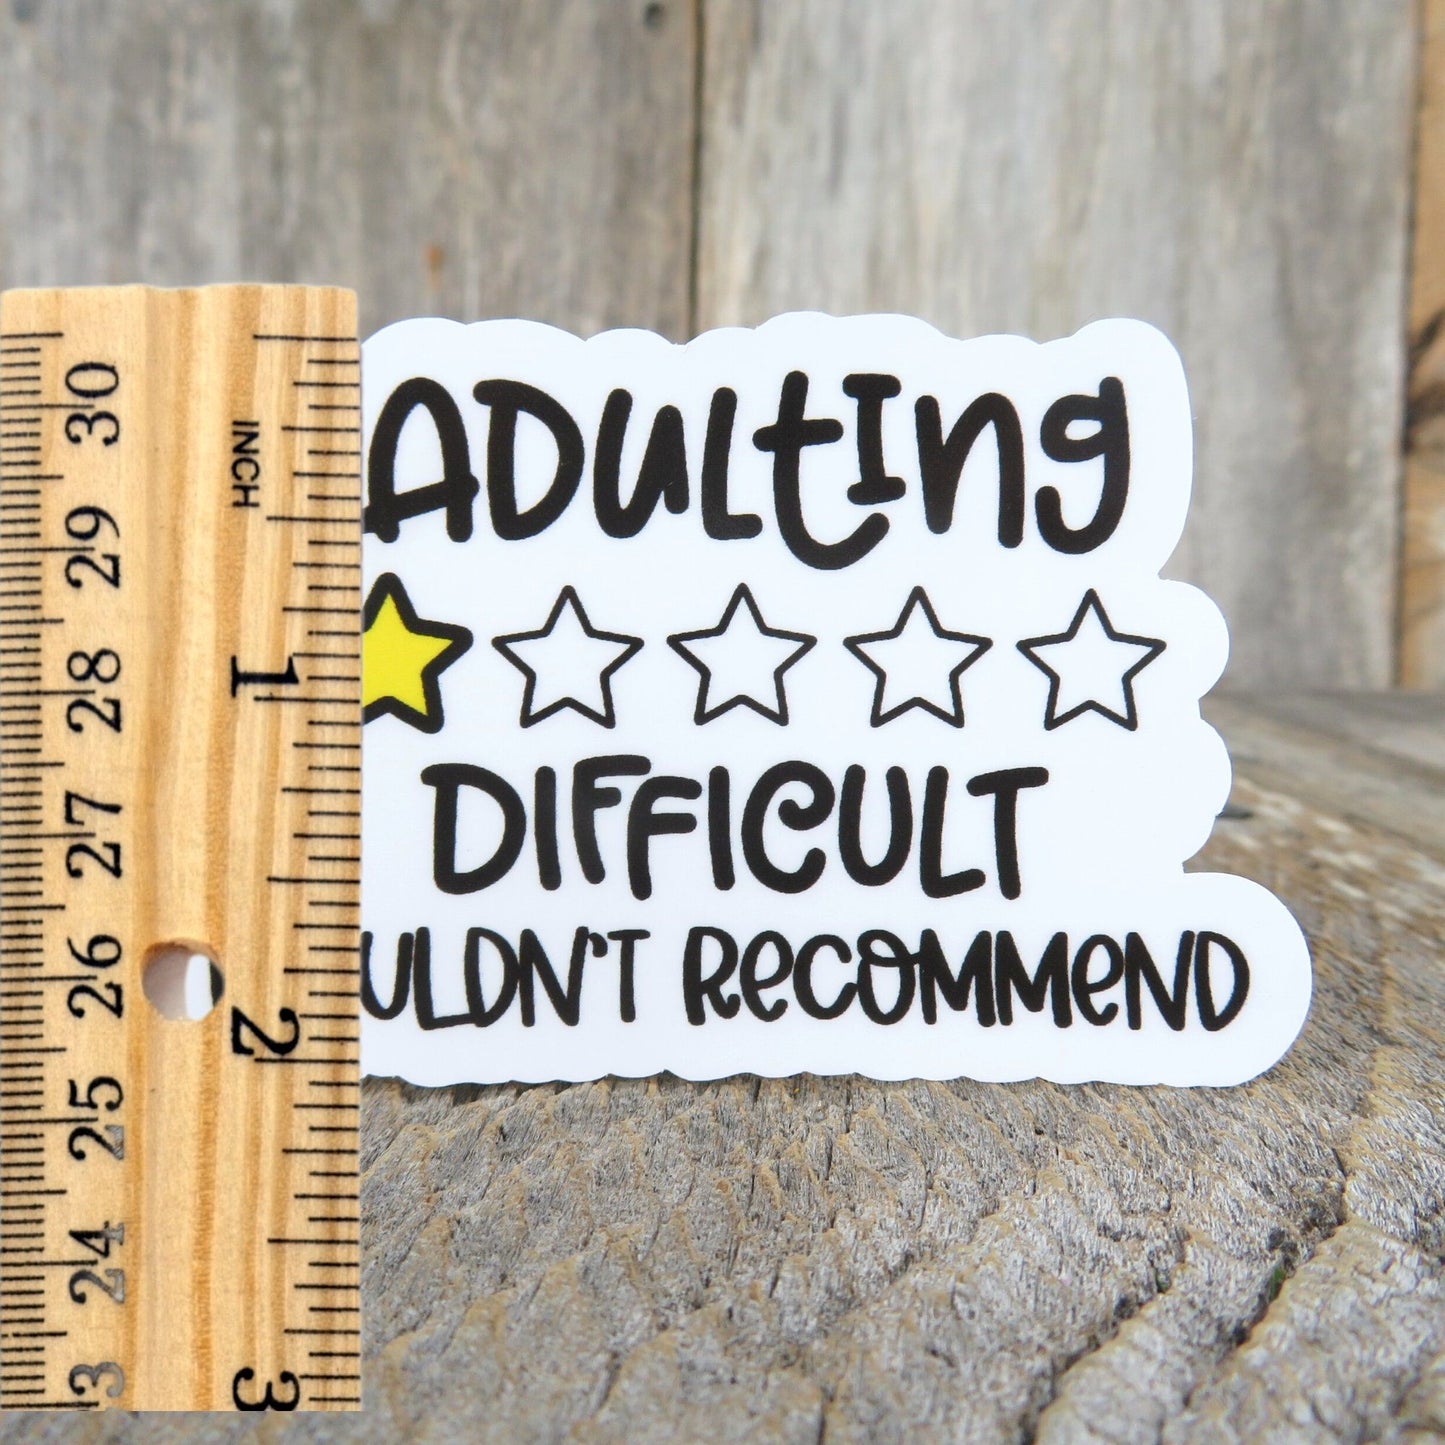 Adulting 1 Star Difficult Wouldn't Recommend Sticker Responsibility Sucks Social Funny Sarcastic